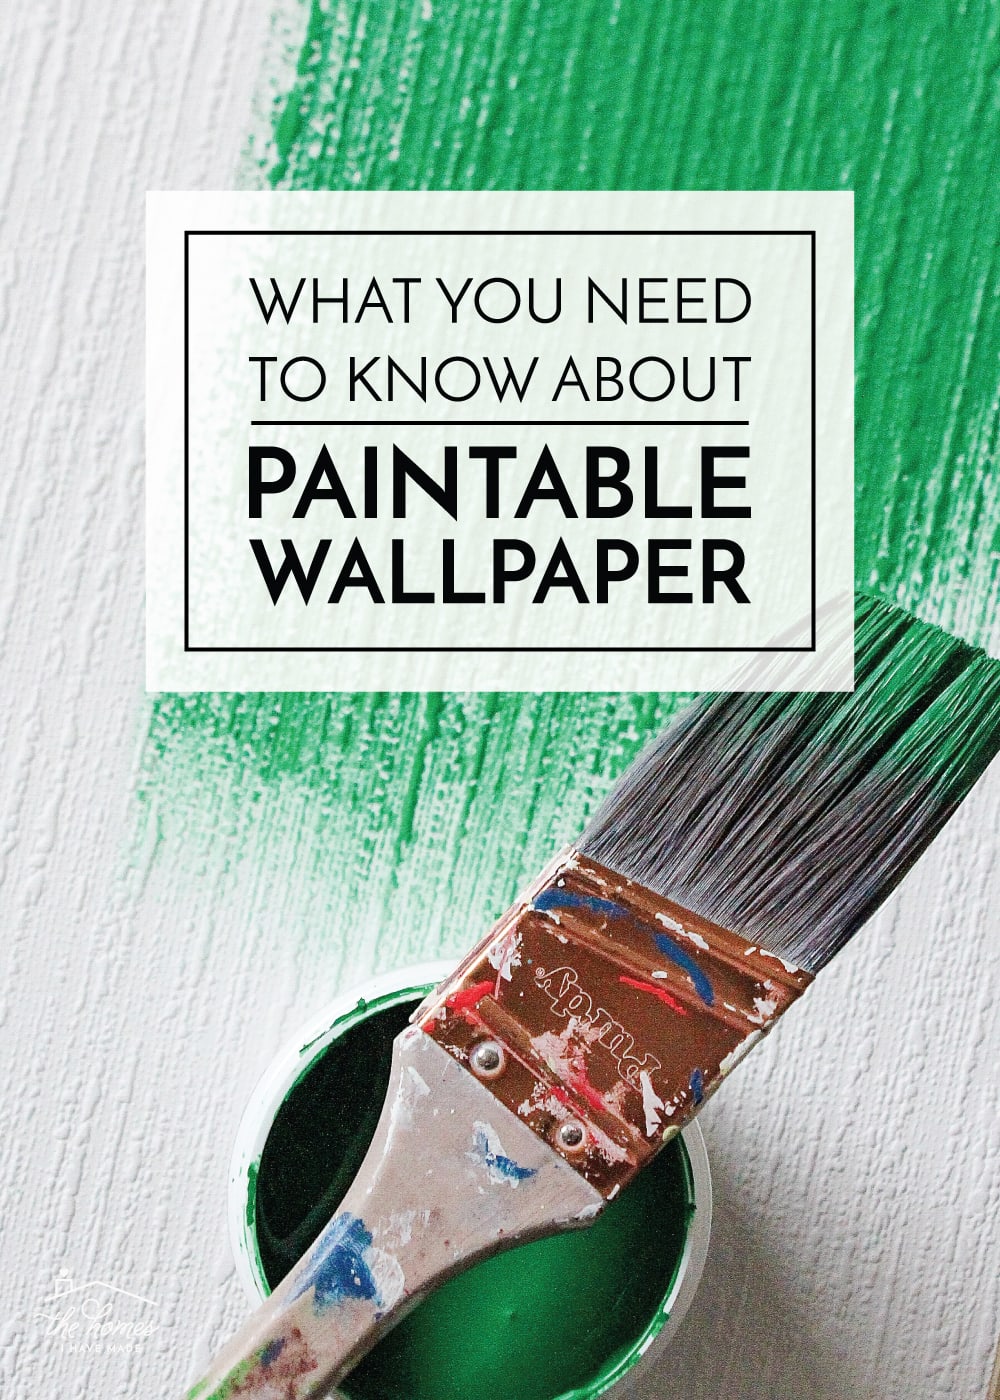 About Paintable Wallpaper